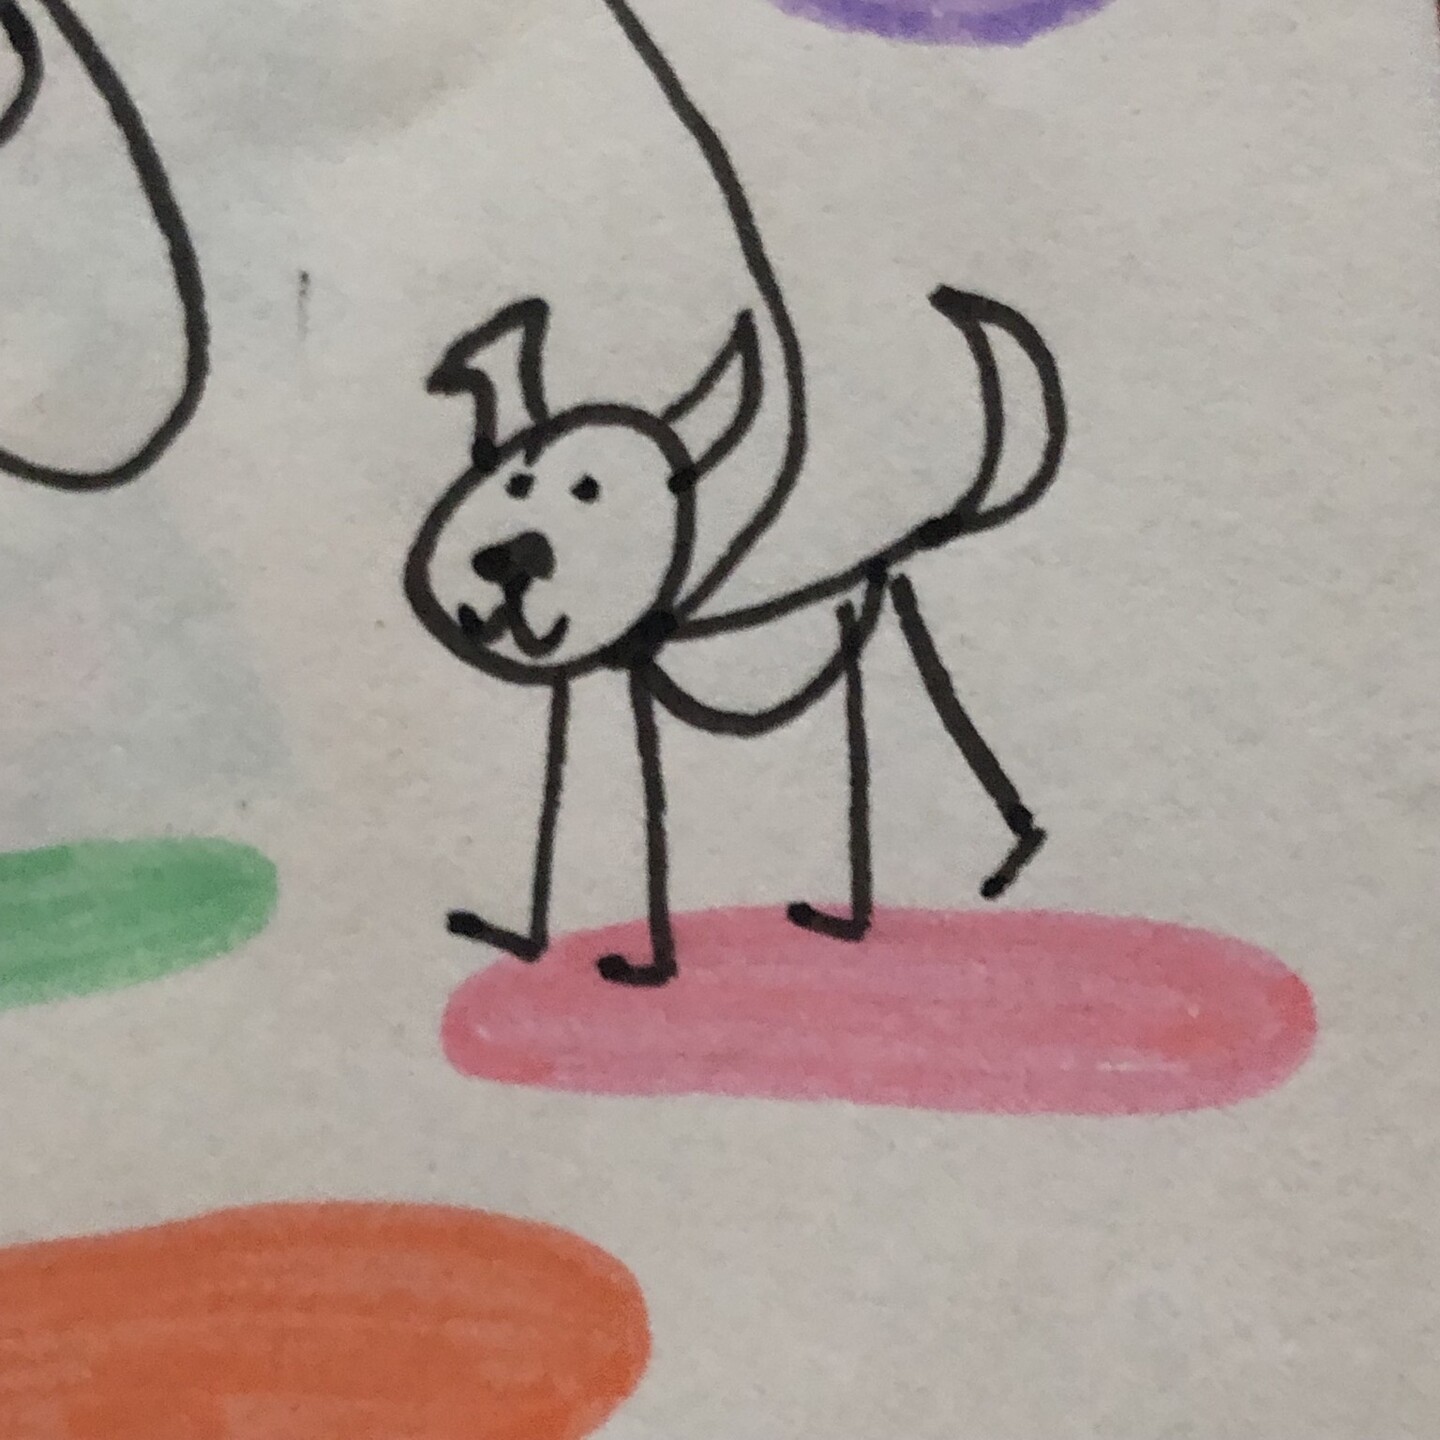 Poorly drawn dog being happy.